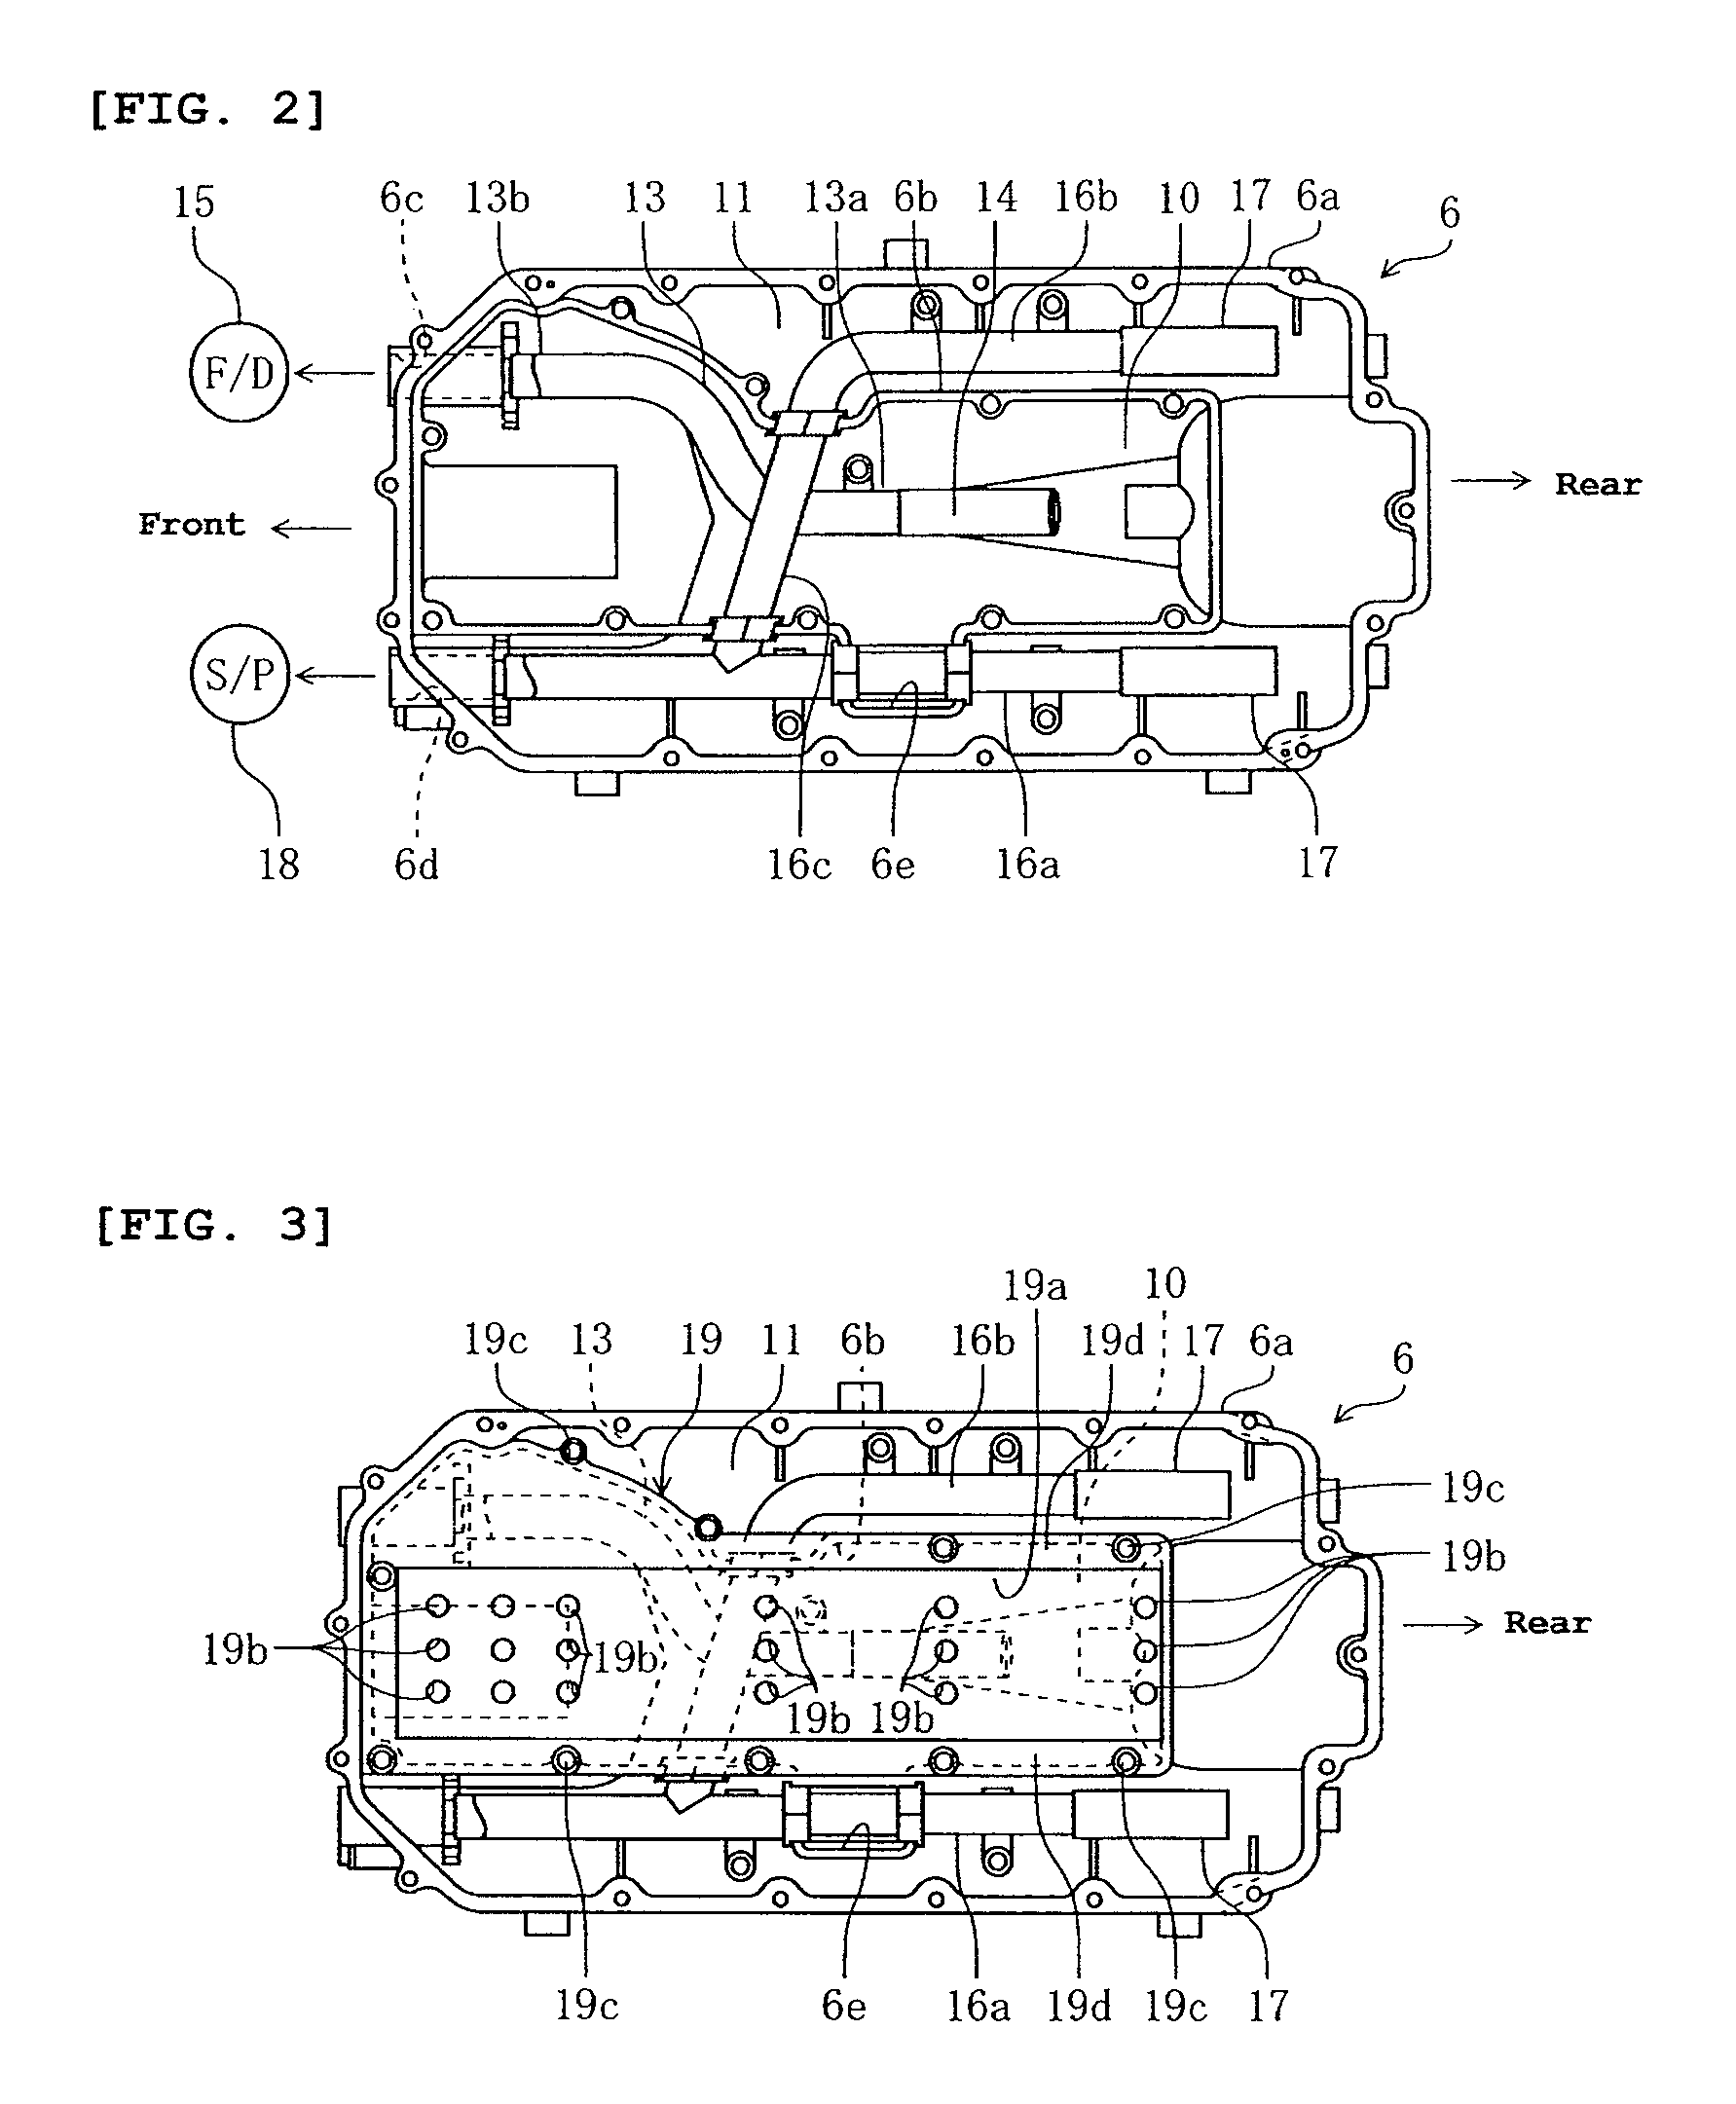 Lubricating apparatus for 4-cycle engine